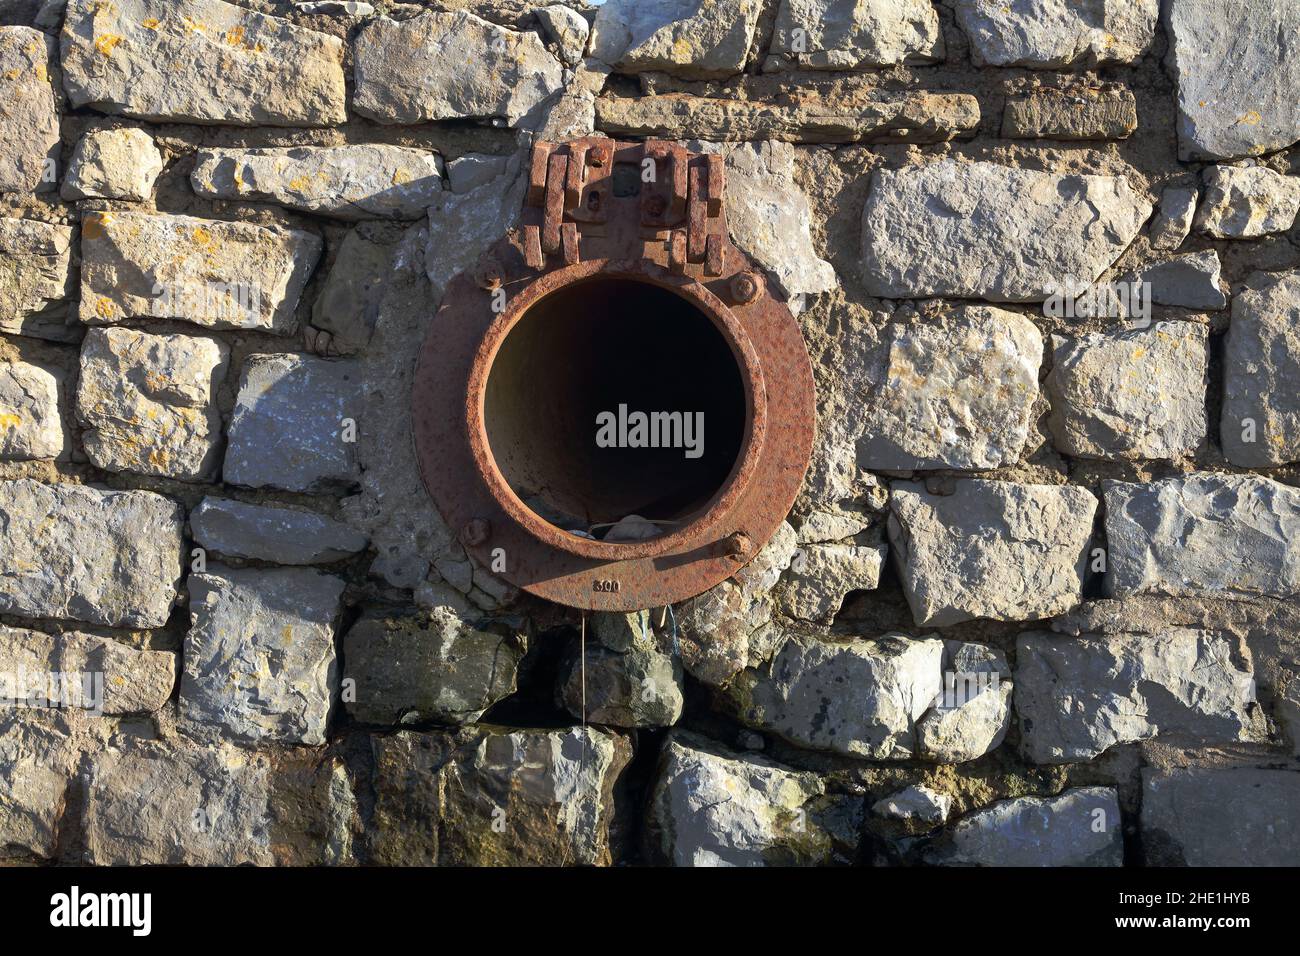 A surface water drainage pipe outlet with the hinged cap missing letting surface water from nearby roads drain out onto the beach harmlessly. Stock Photo